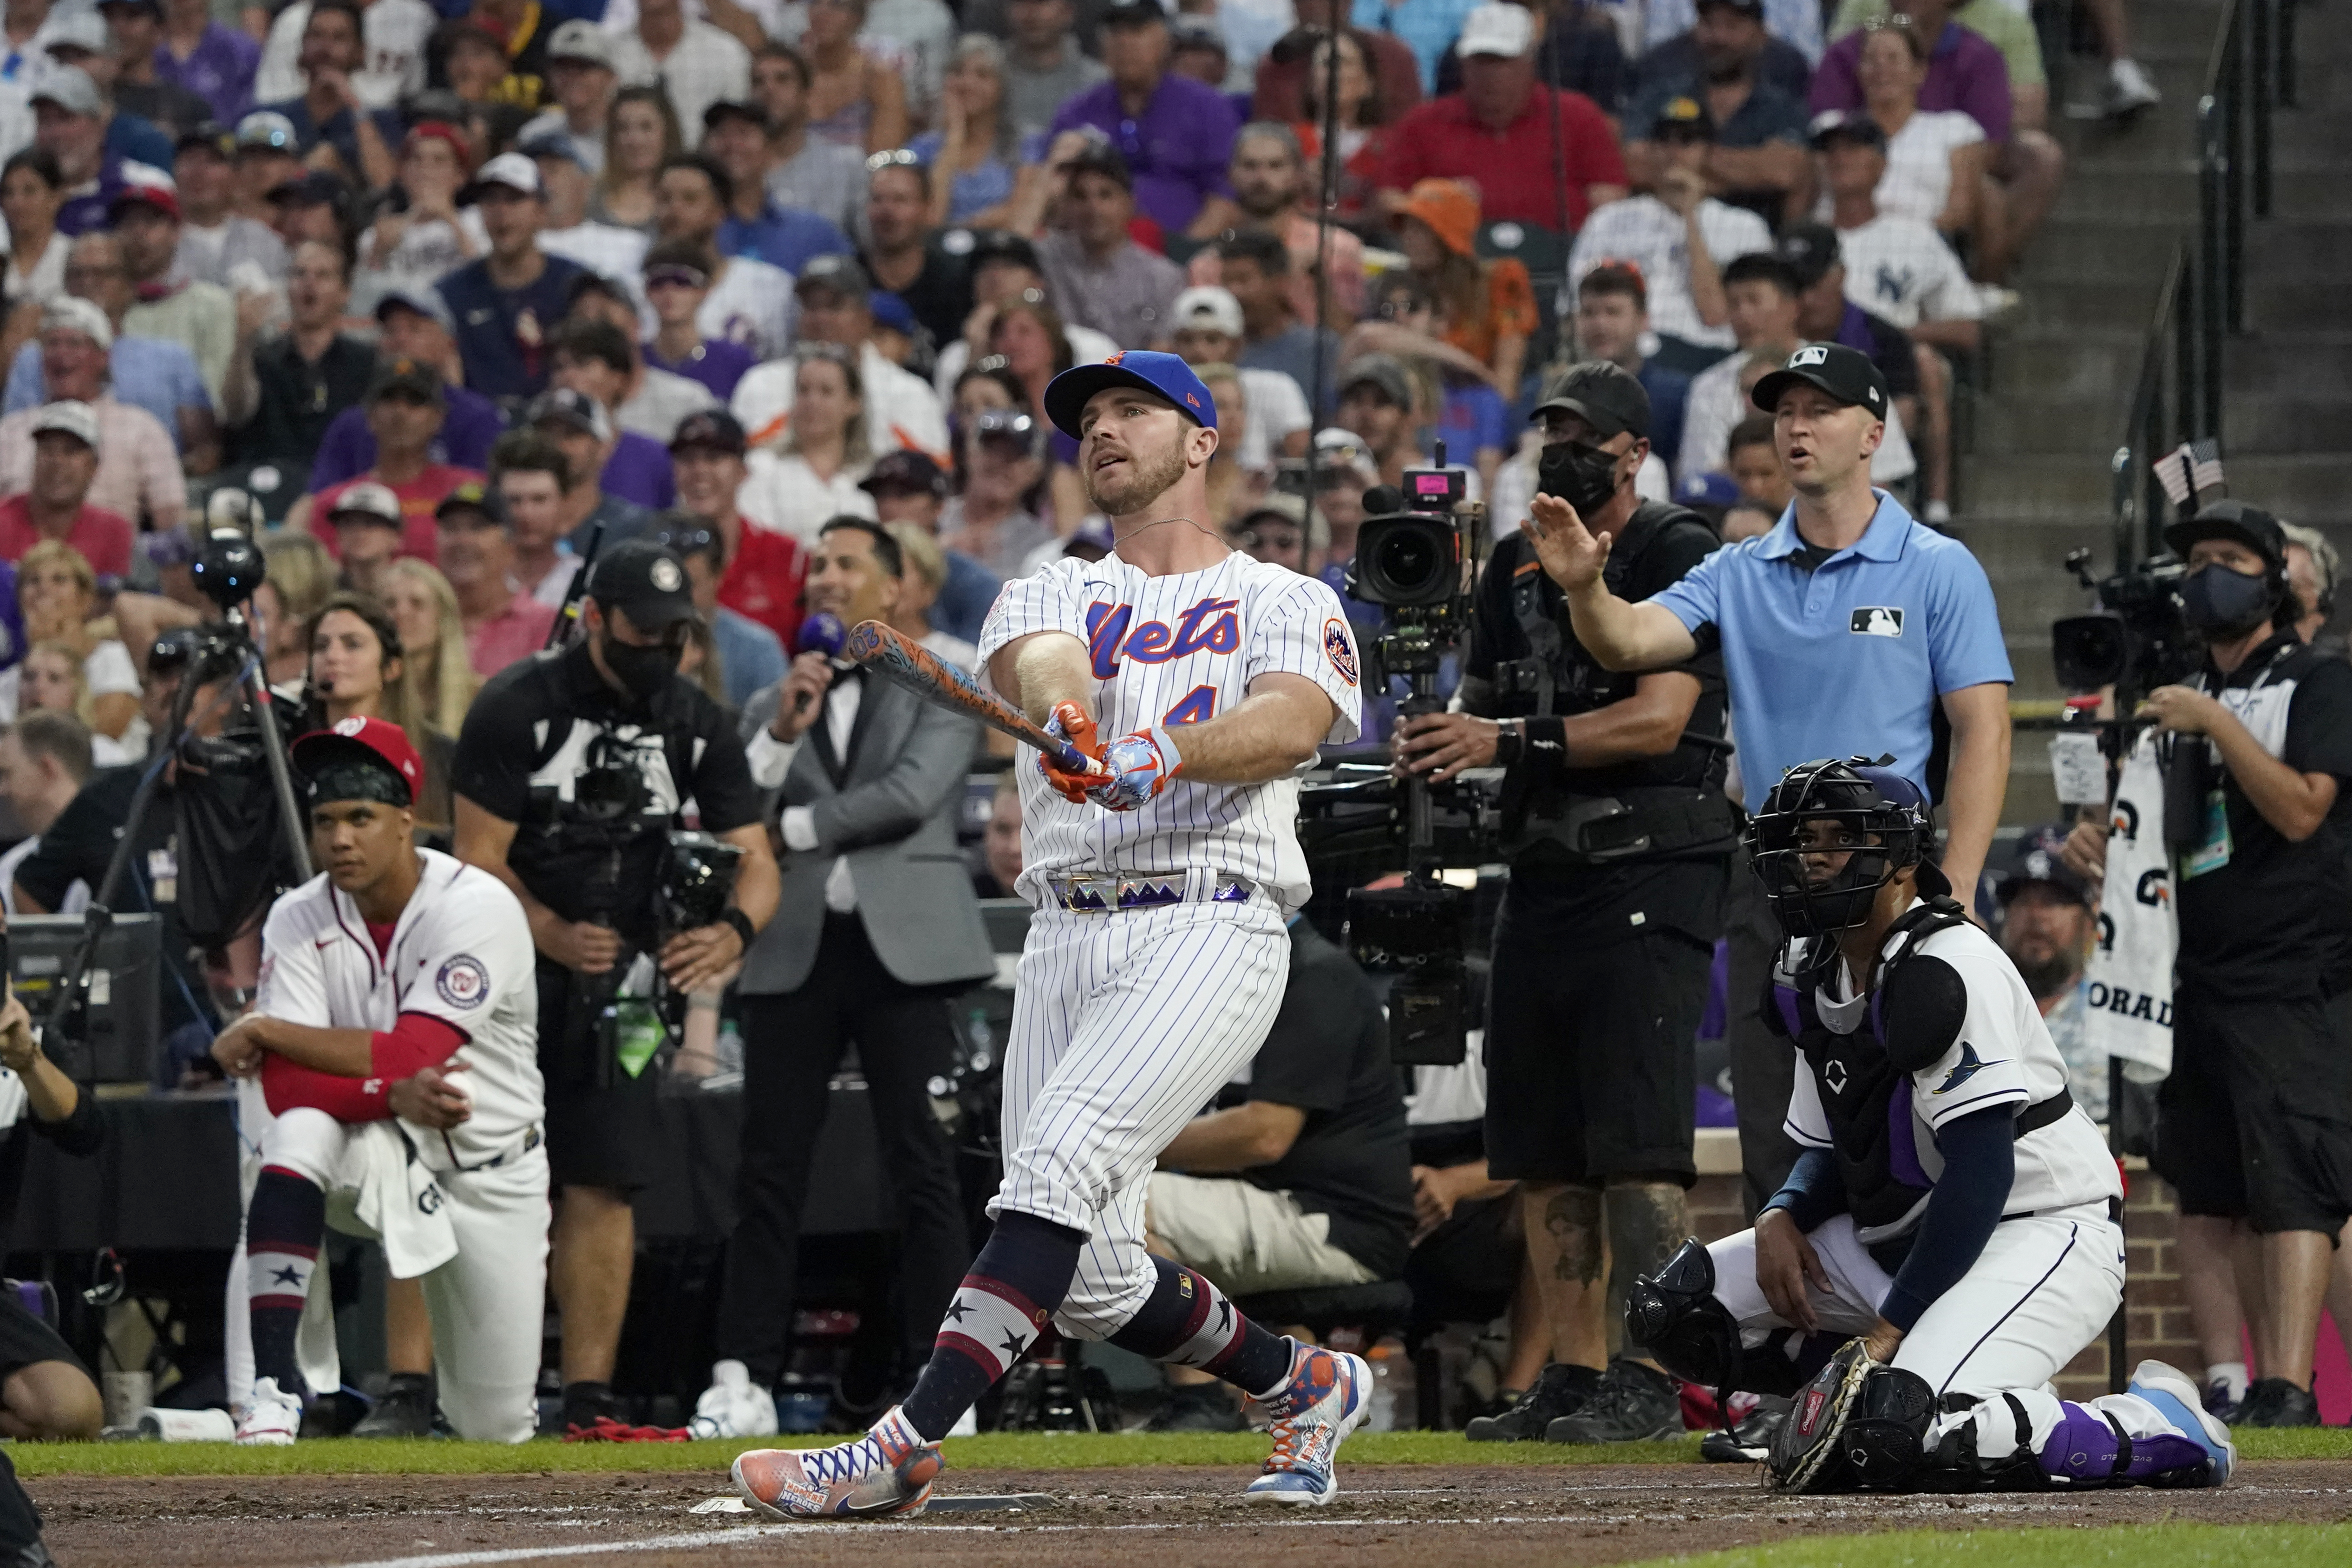 2022 MLB All-Star Game: Pete Alonso's 10-step plan to winning the